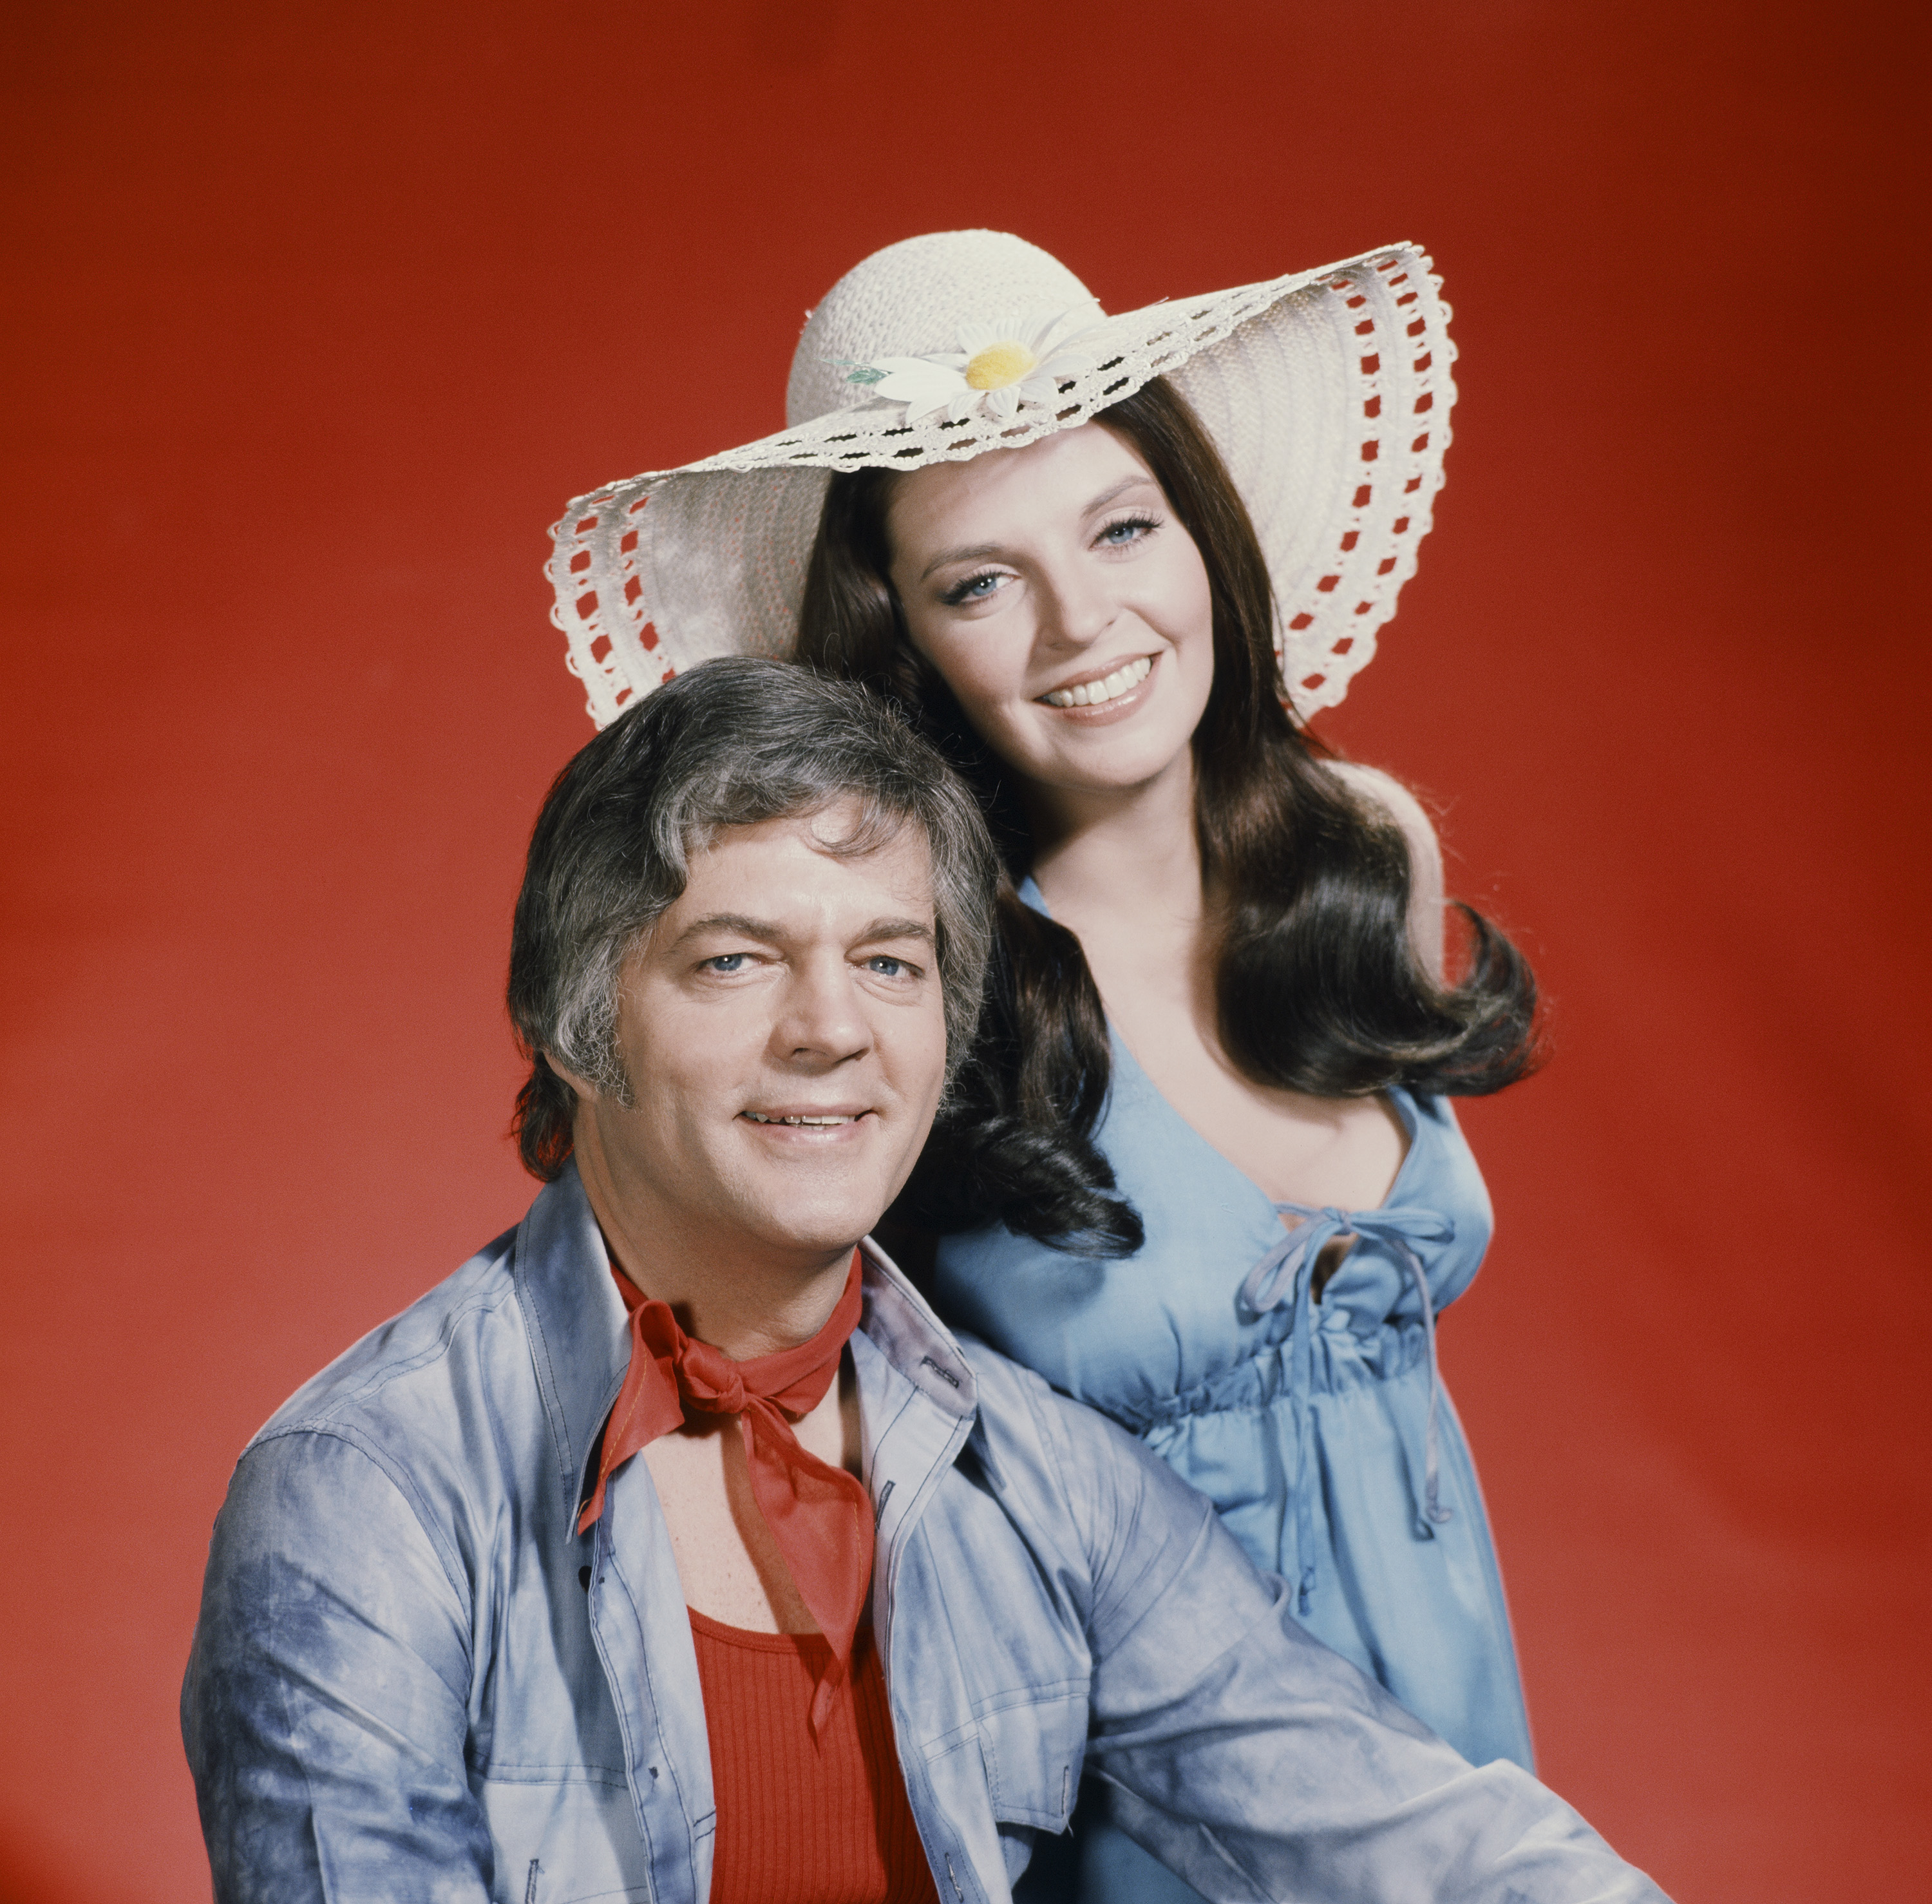 Actor Bill Hayes as Doug Williams pictured with actress Susan Seaforth Hayes as Julie Williams in "Days of Our Lives" on May 28, 1973 | Source: Getty Images